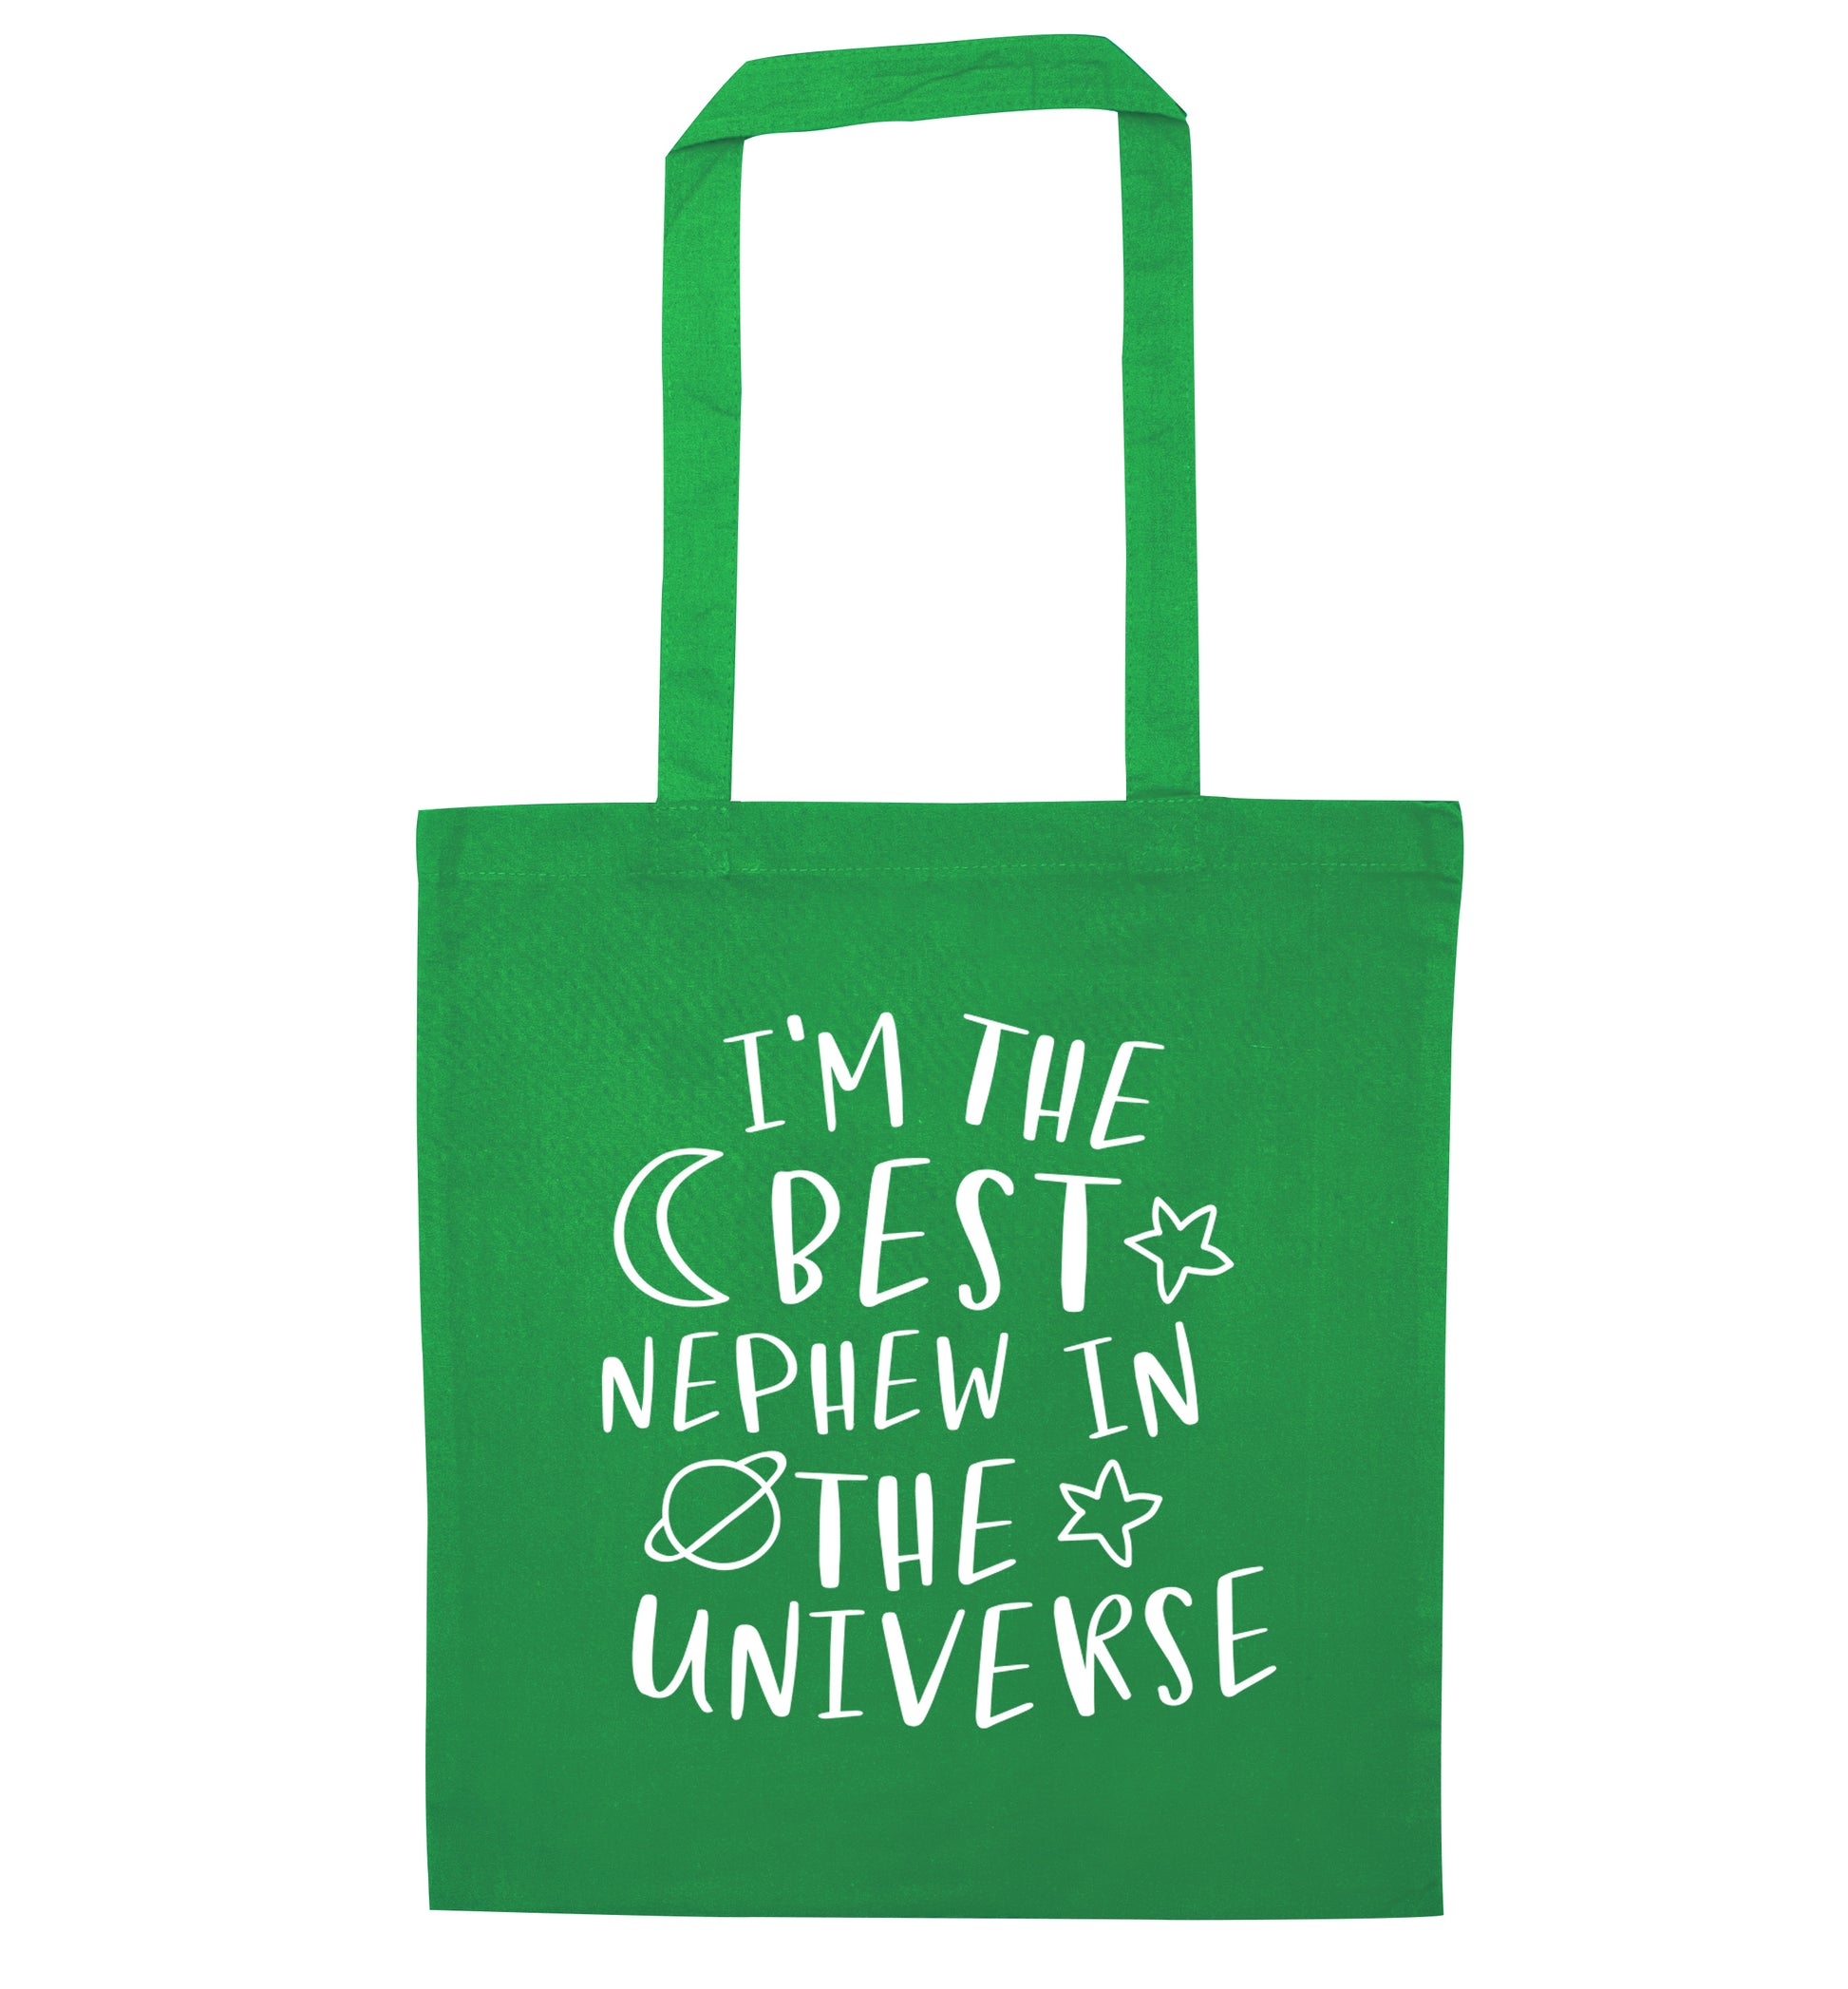 I'm the best nephew in the universe green tote bag